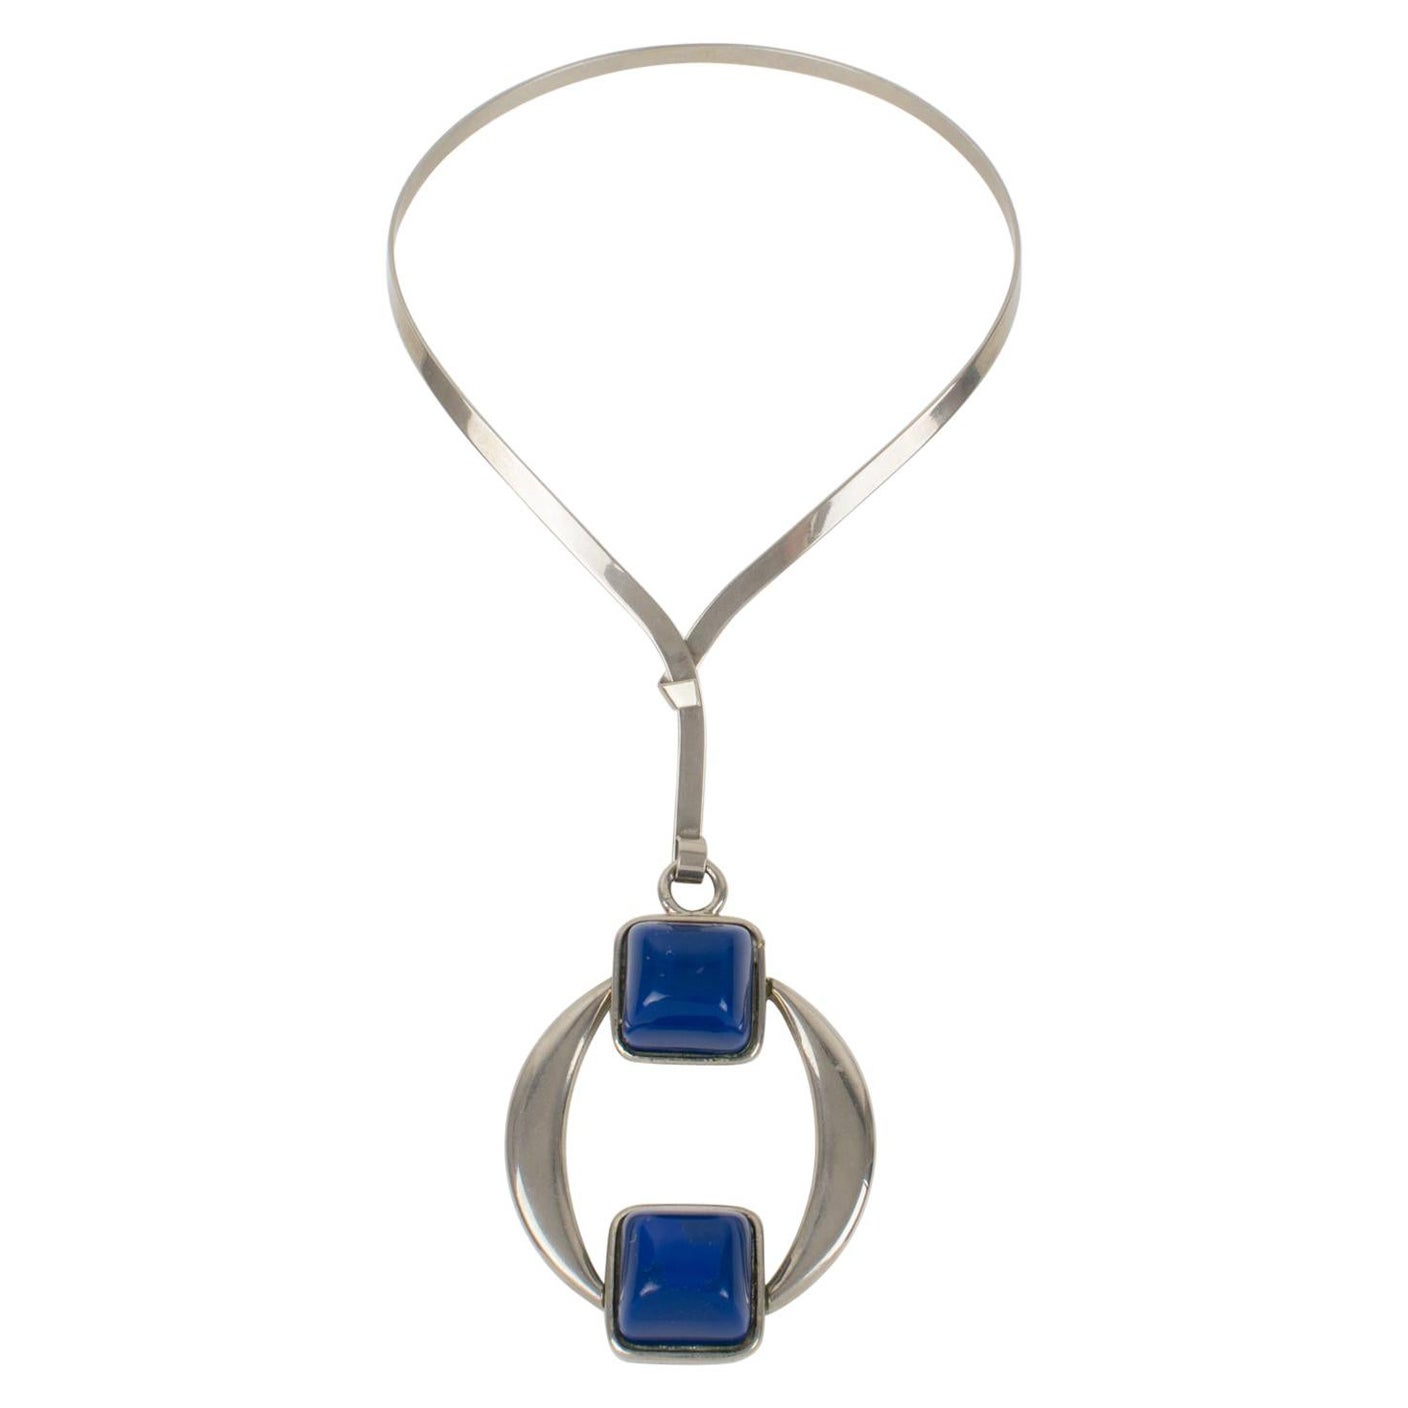 Mid Century Space Age Collar Pendant Necklace Stainless Steel and Blue Resin